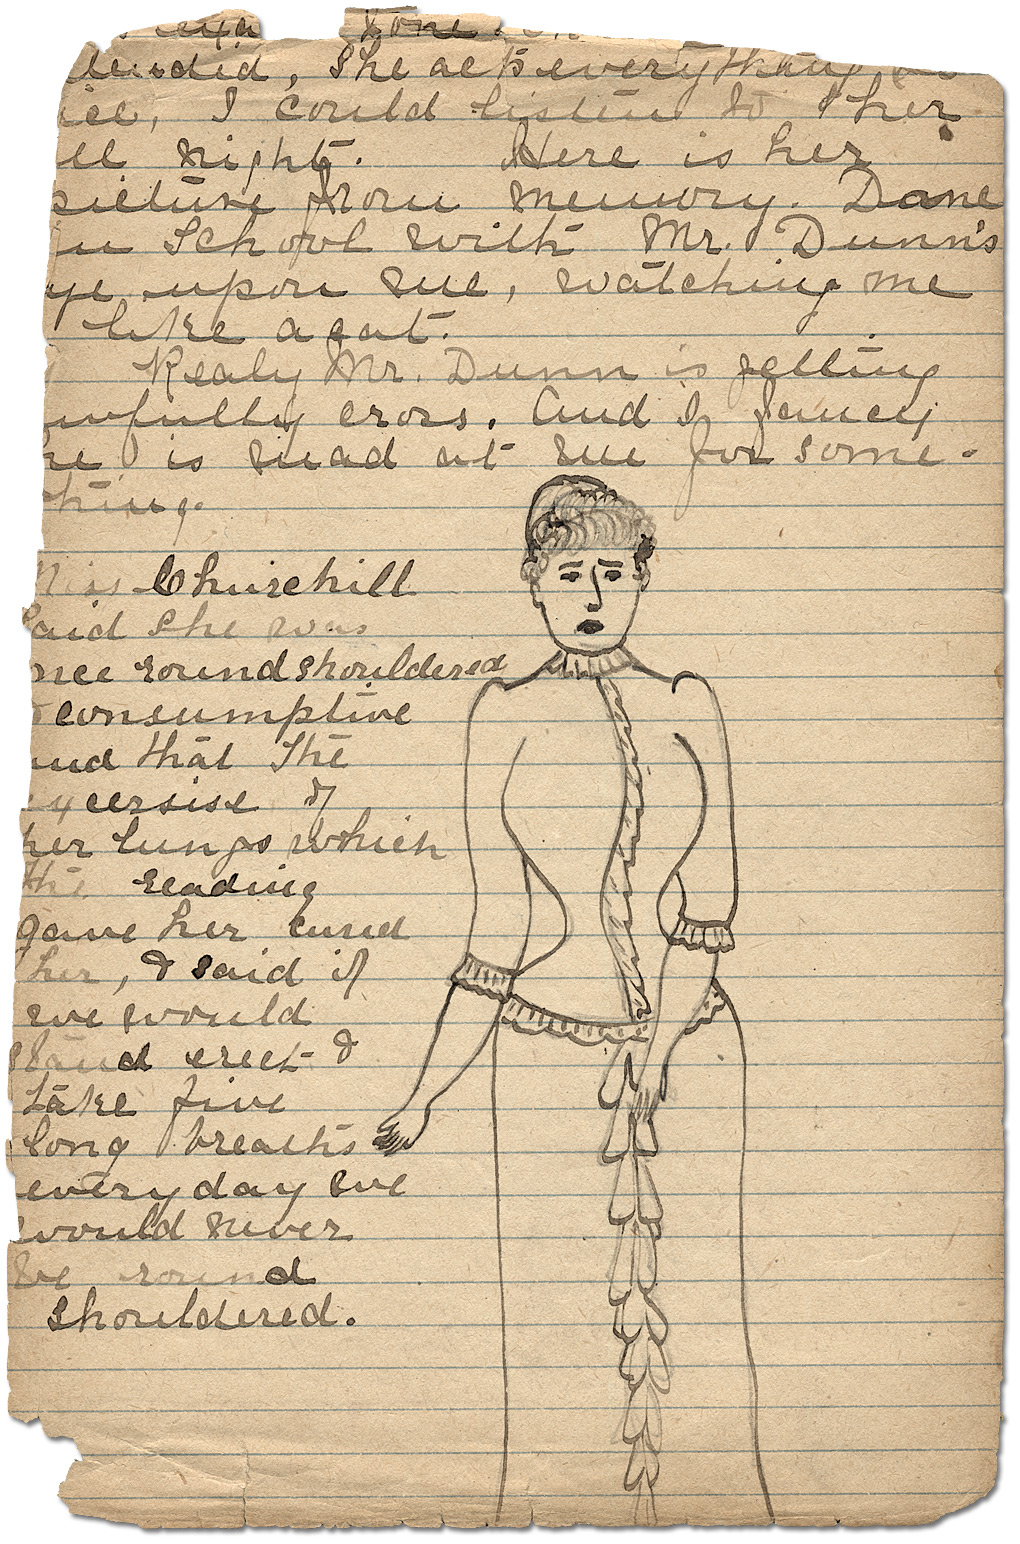 Page with Sketch from Marty Hastie’s diary, 1884 (03)